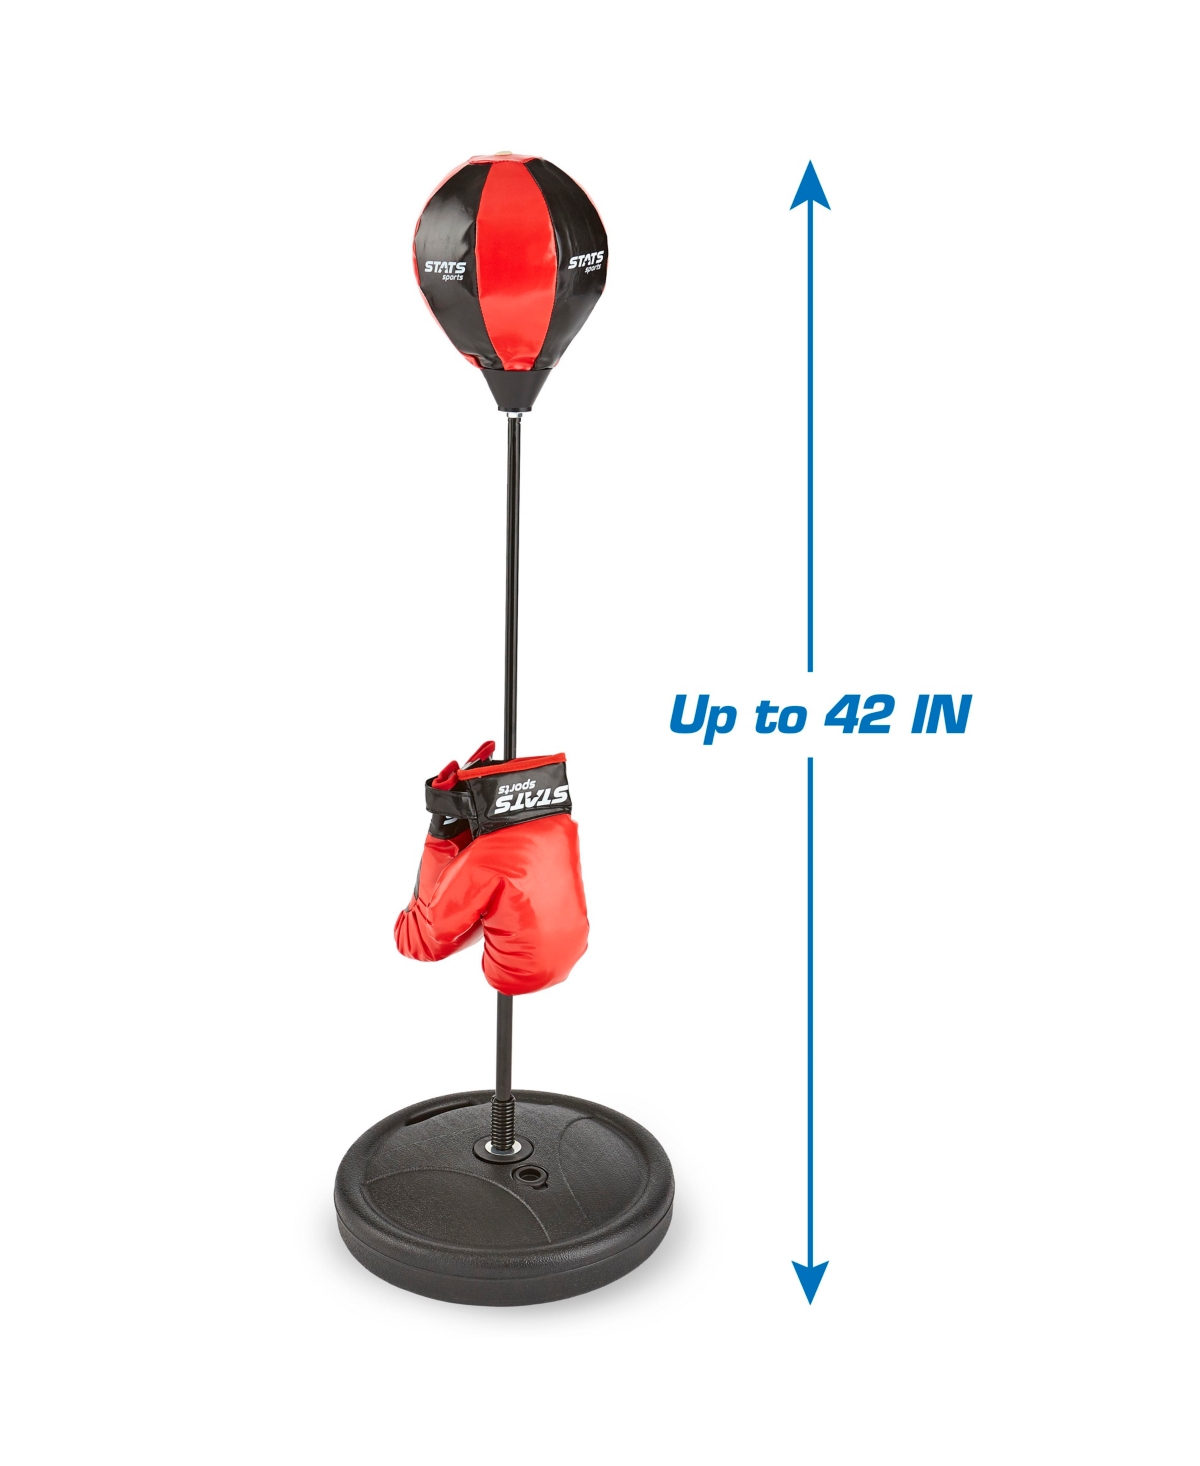 Shop Stats Adjustable Punching Bag With Gloves Set, Created For You By Toys R Us In Multi